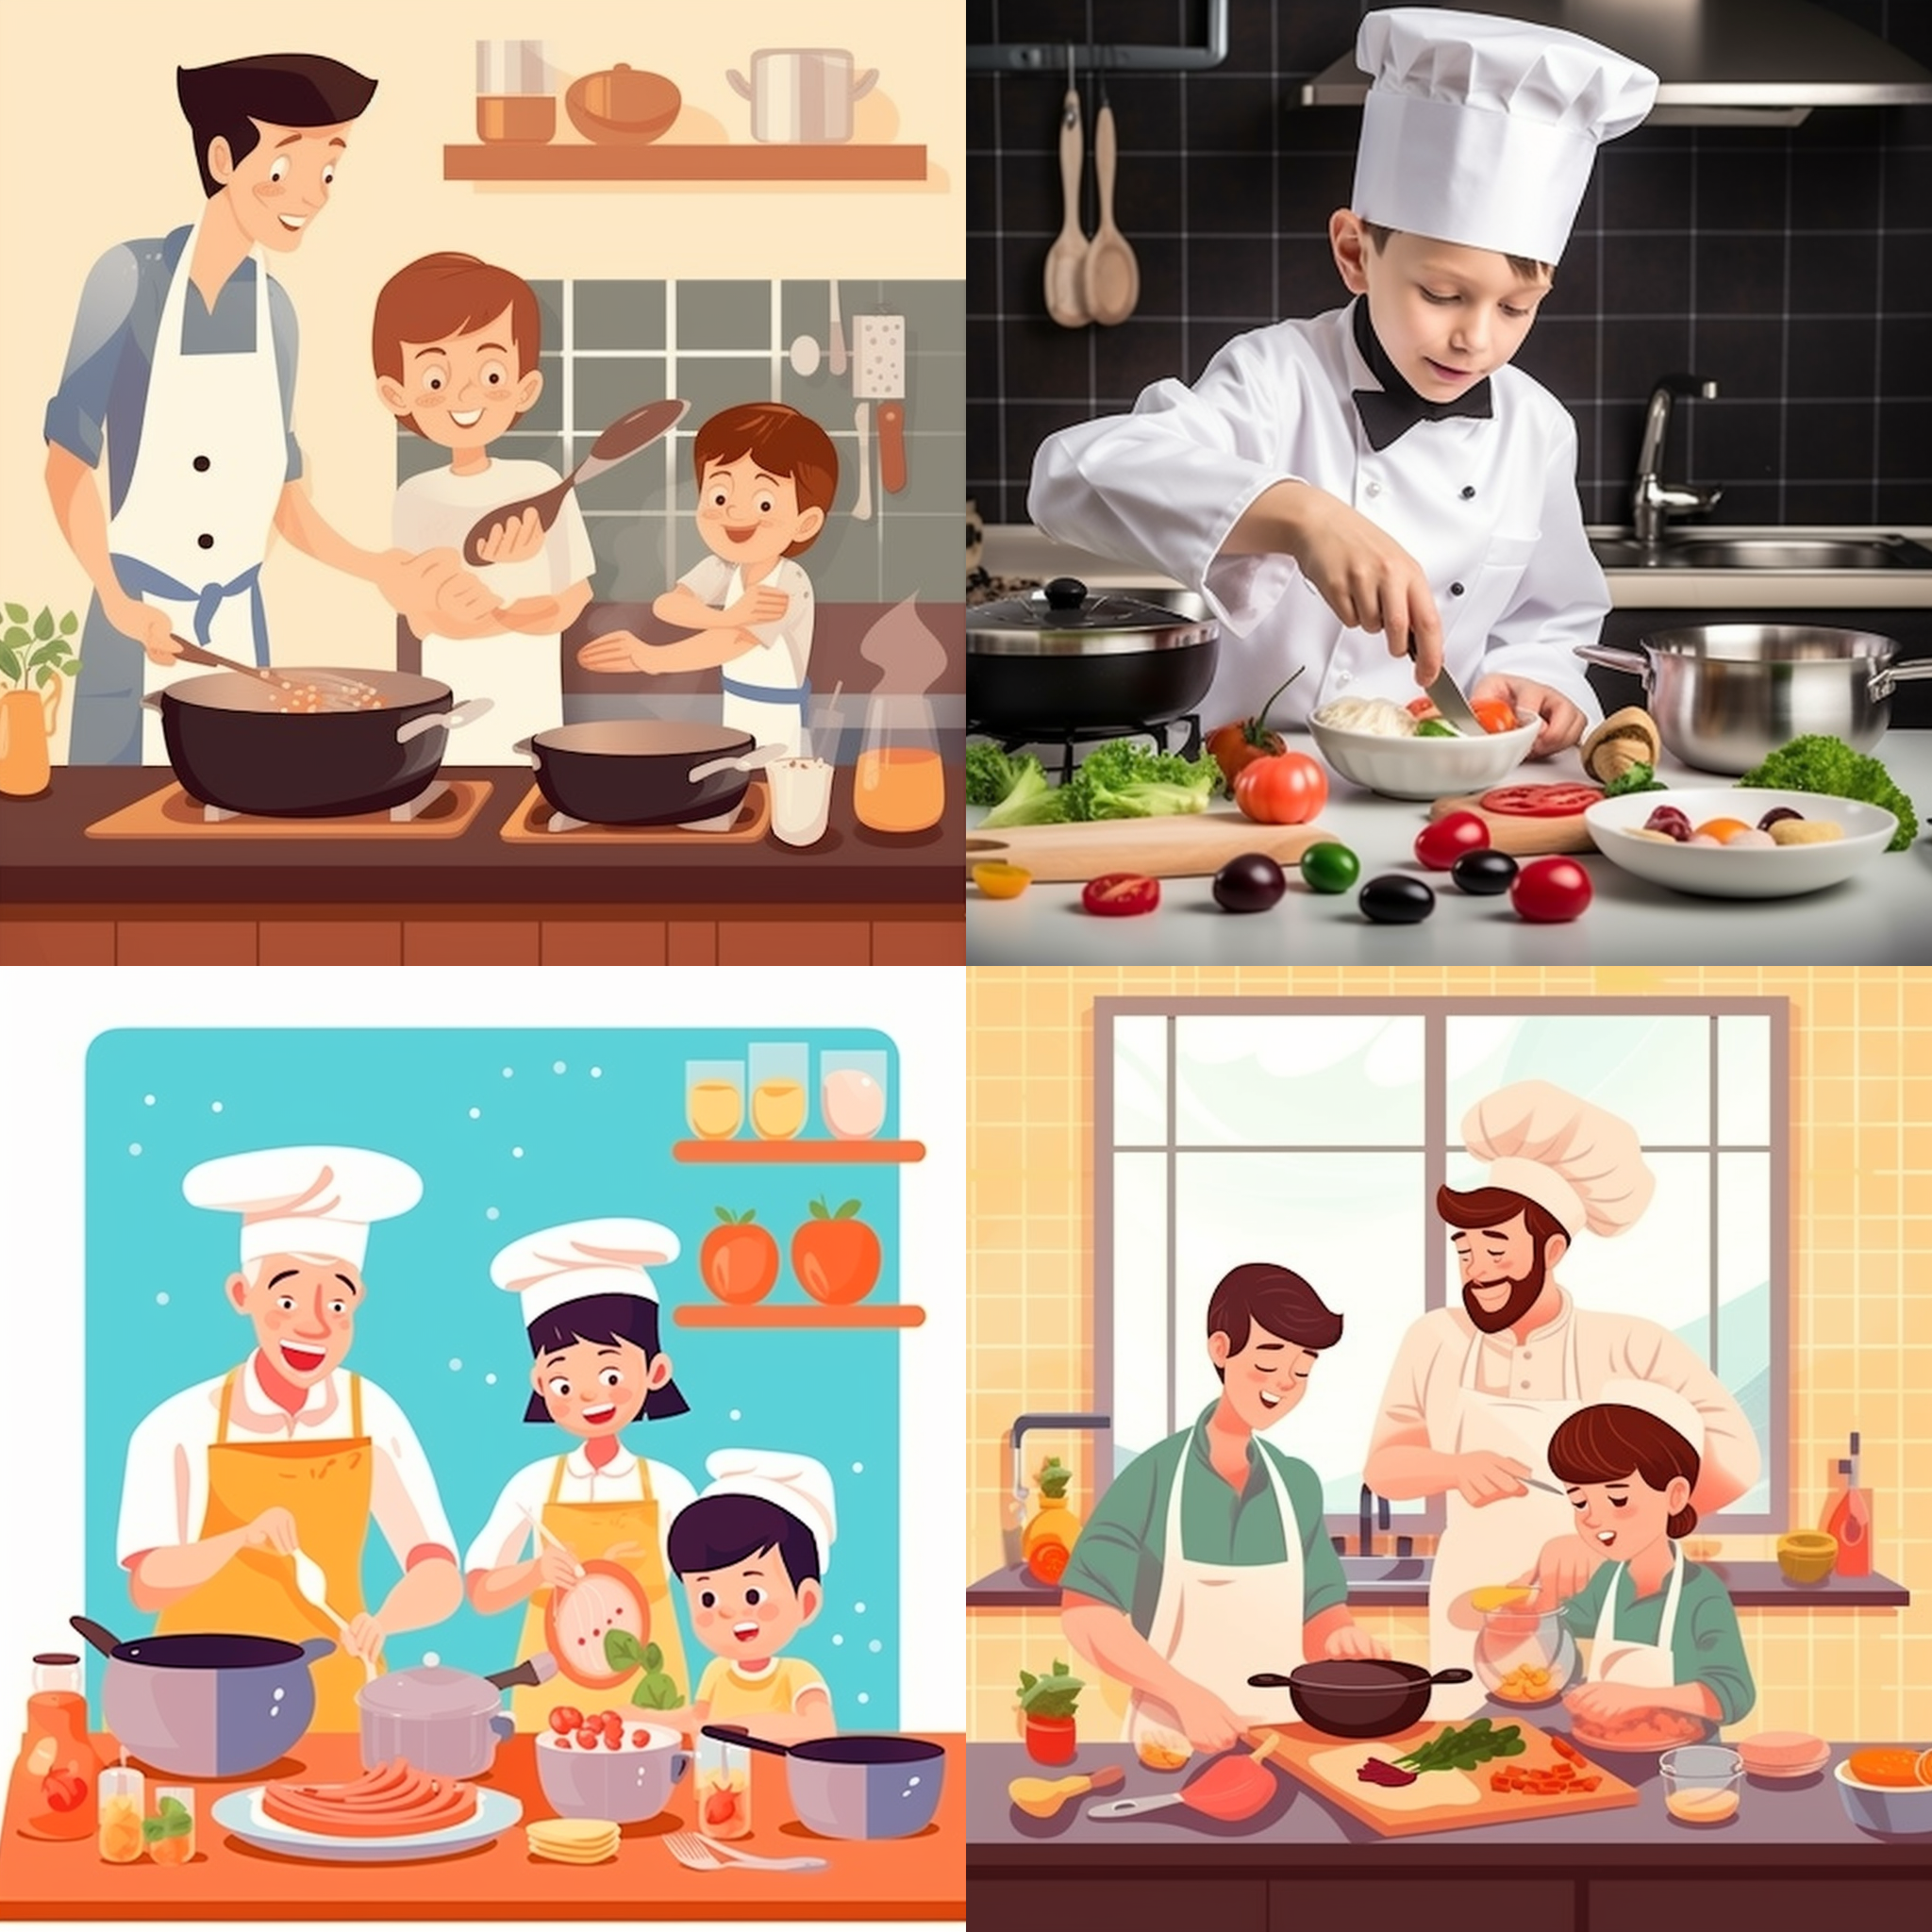 A grid of four images generated using the prompt ``a young chef is cooking dinner for his parents.'' The first image is an illustration of a dad cooking with his two children. The second image is a photo of a young boy cooking alone in the kitchen. The third image is a vector art image that depicts parents and their son cooking. The fourth image is an illustration of parents and their son who is a young man cooking in the kitchen with a wide window.